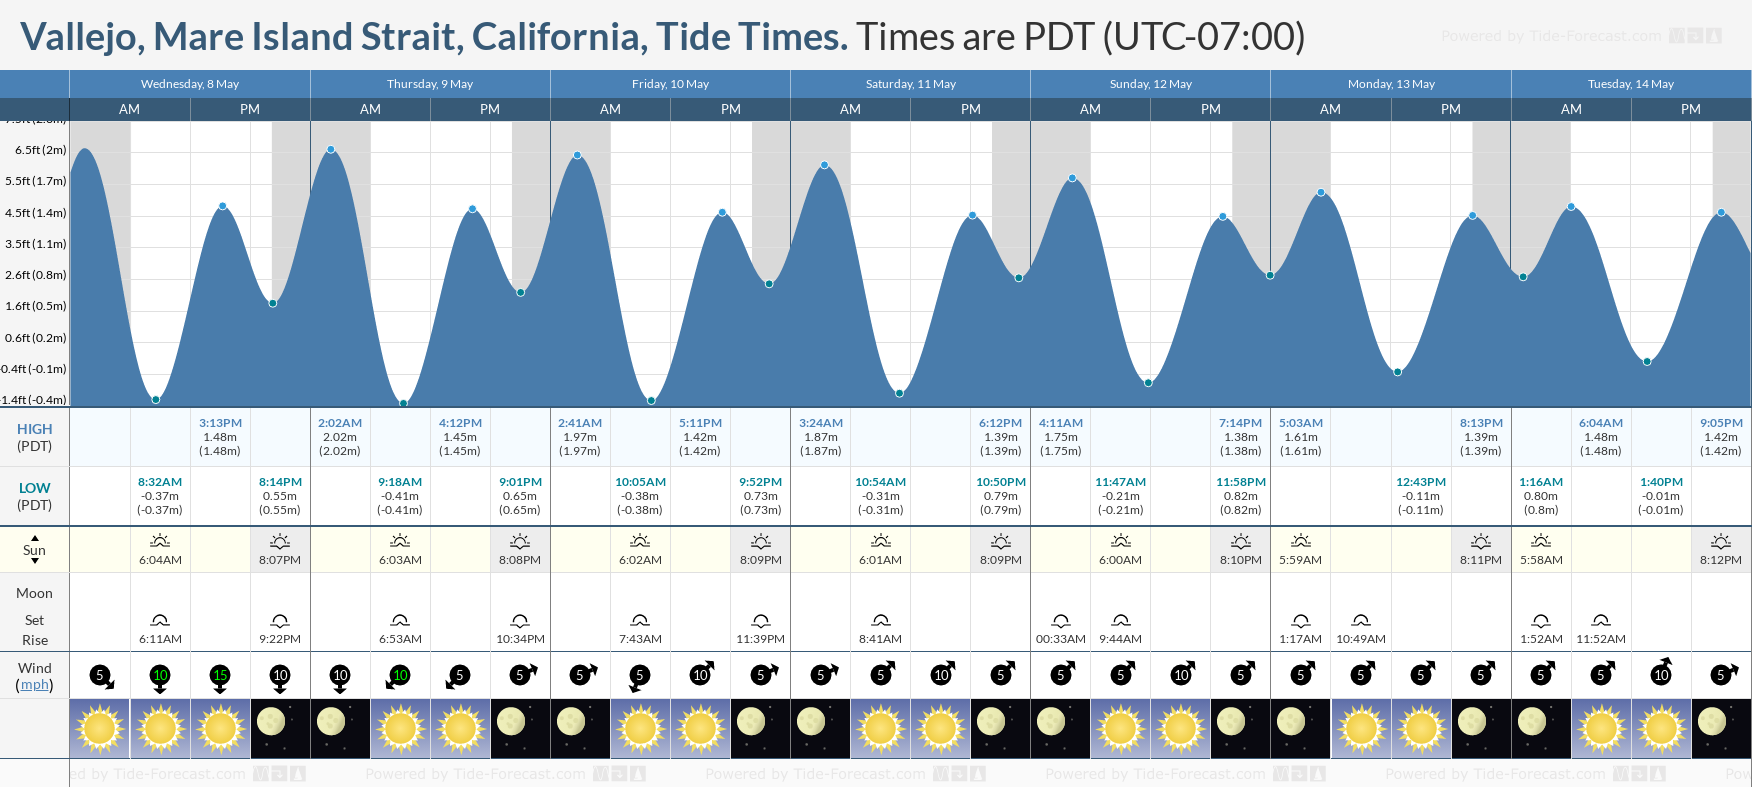 Vallejo, Mare Island Strait, California Tide Chart including high and low tide tide times for the next 7 days